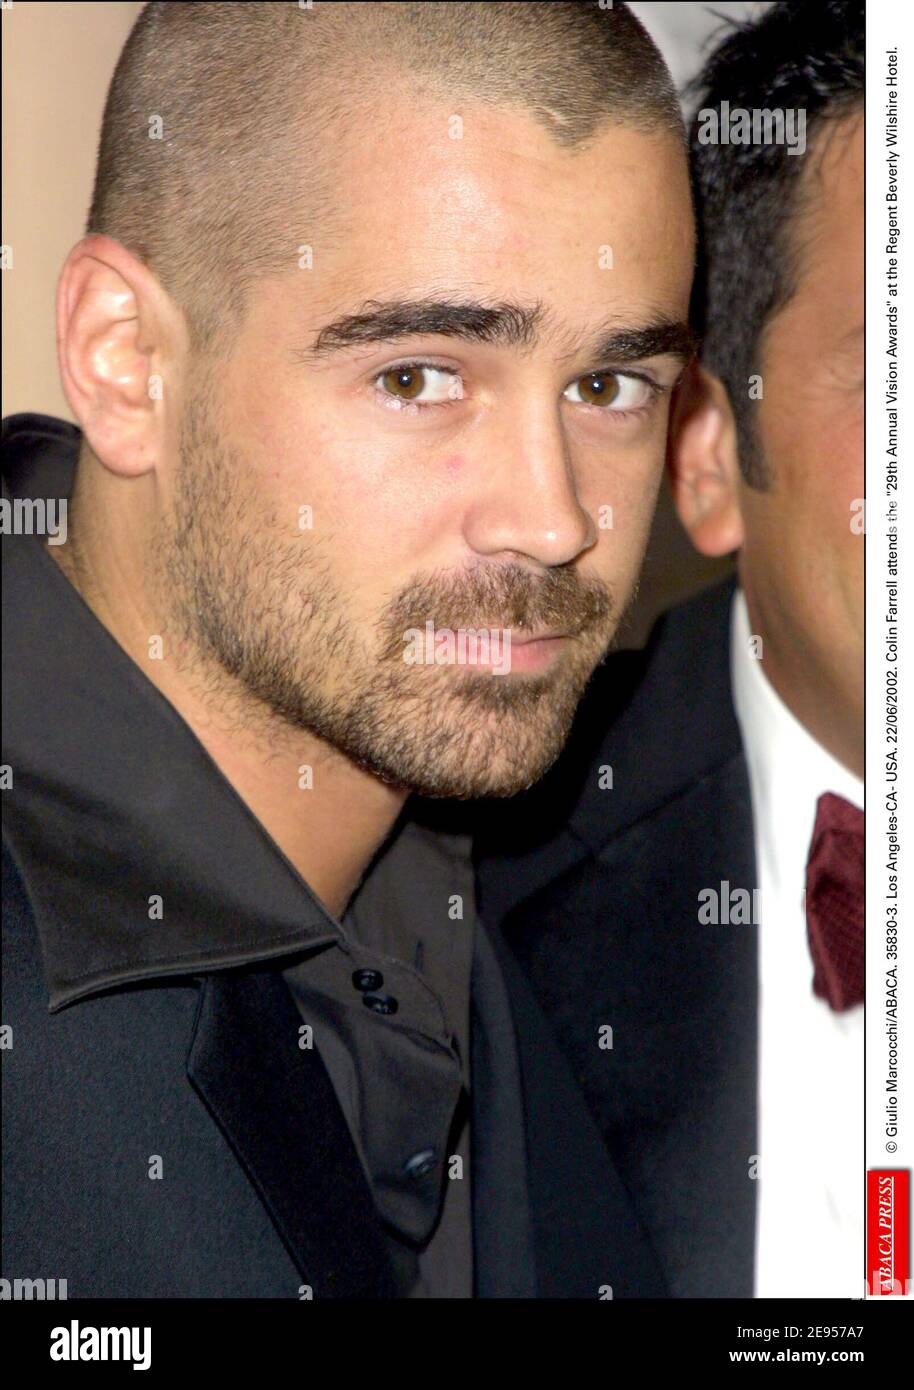 © Giulio Marcocchi/ABACA. 35830-3. Los Angeles-CA- USA. 22/06/2002. Colin Farrell attends the 29th Annual Vision Awards at the Regent Beverly Wilshire Hotel. Stock Photo